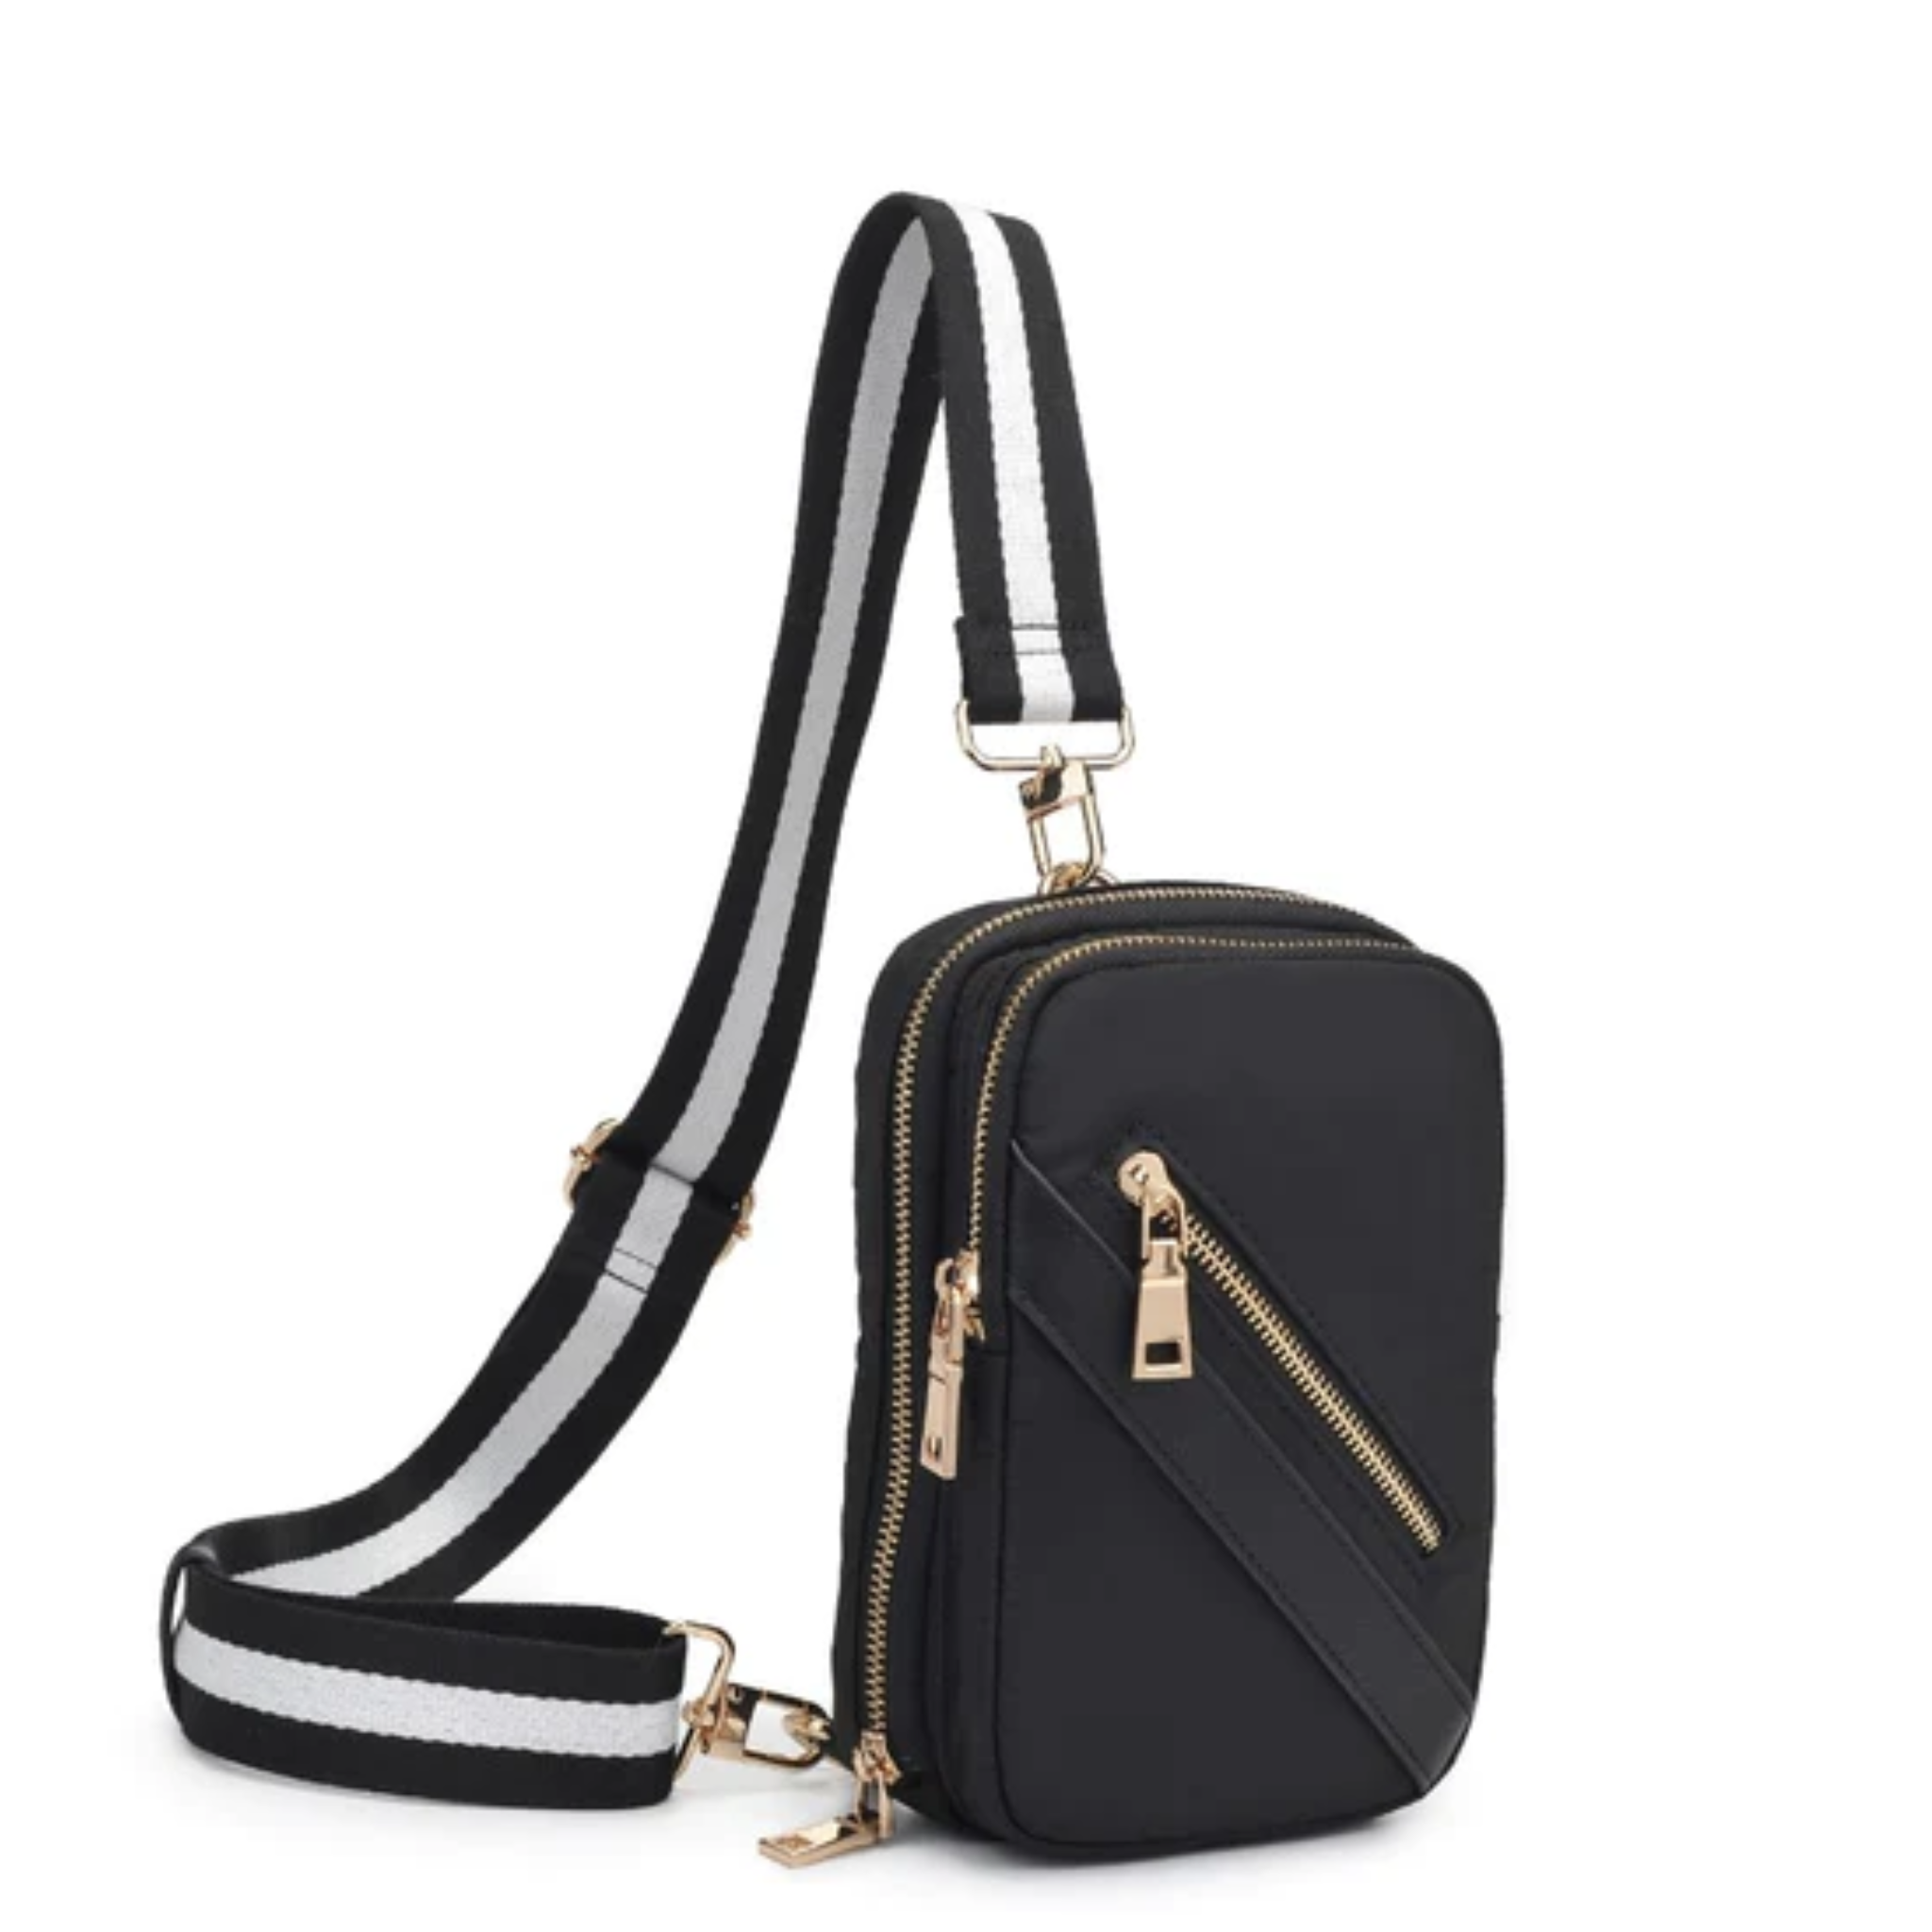 ACCOLADE SLING BACKPACK